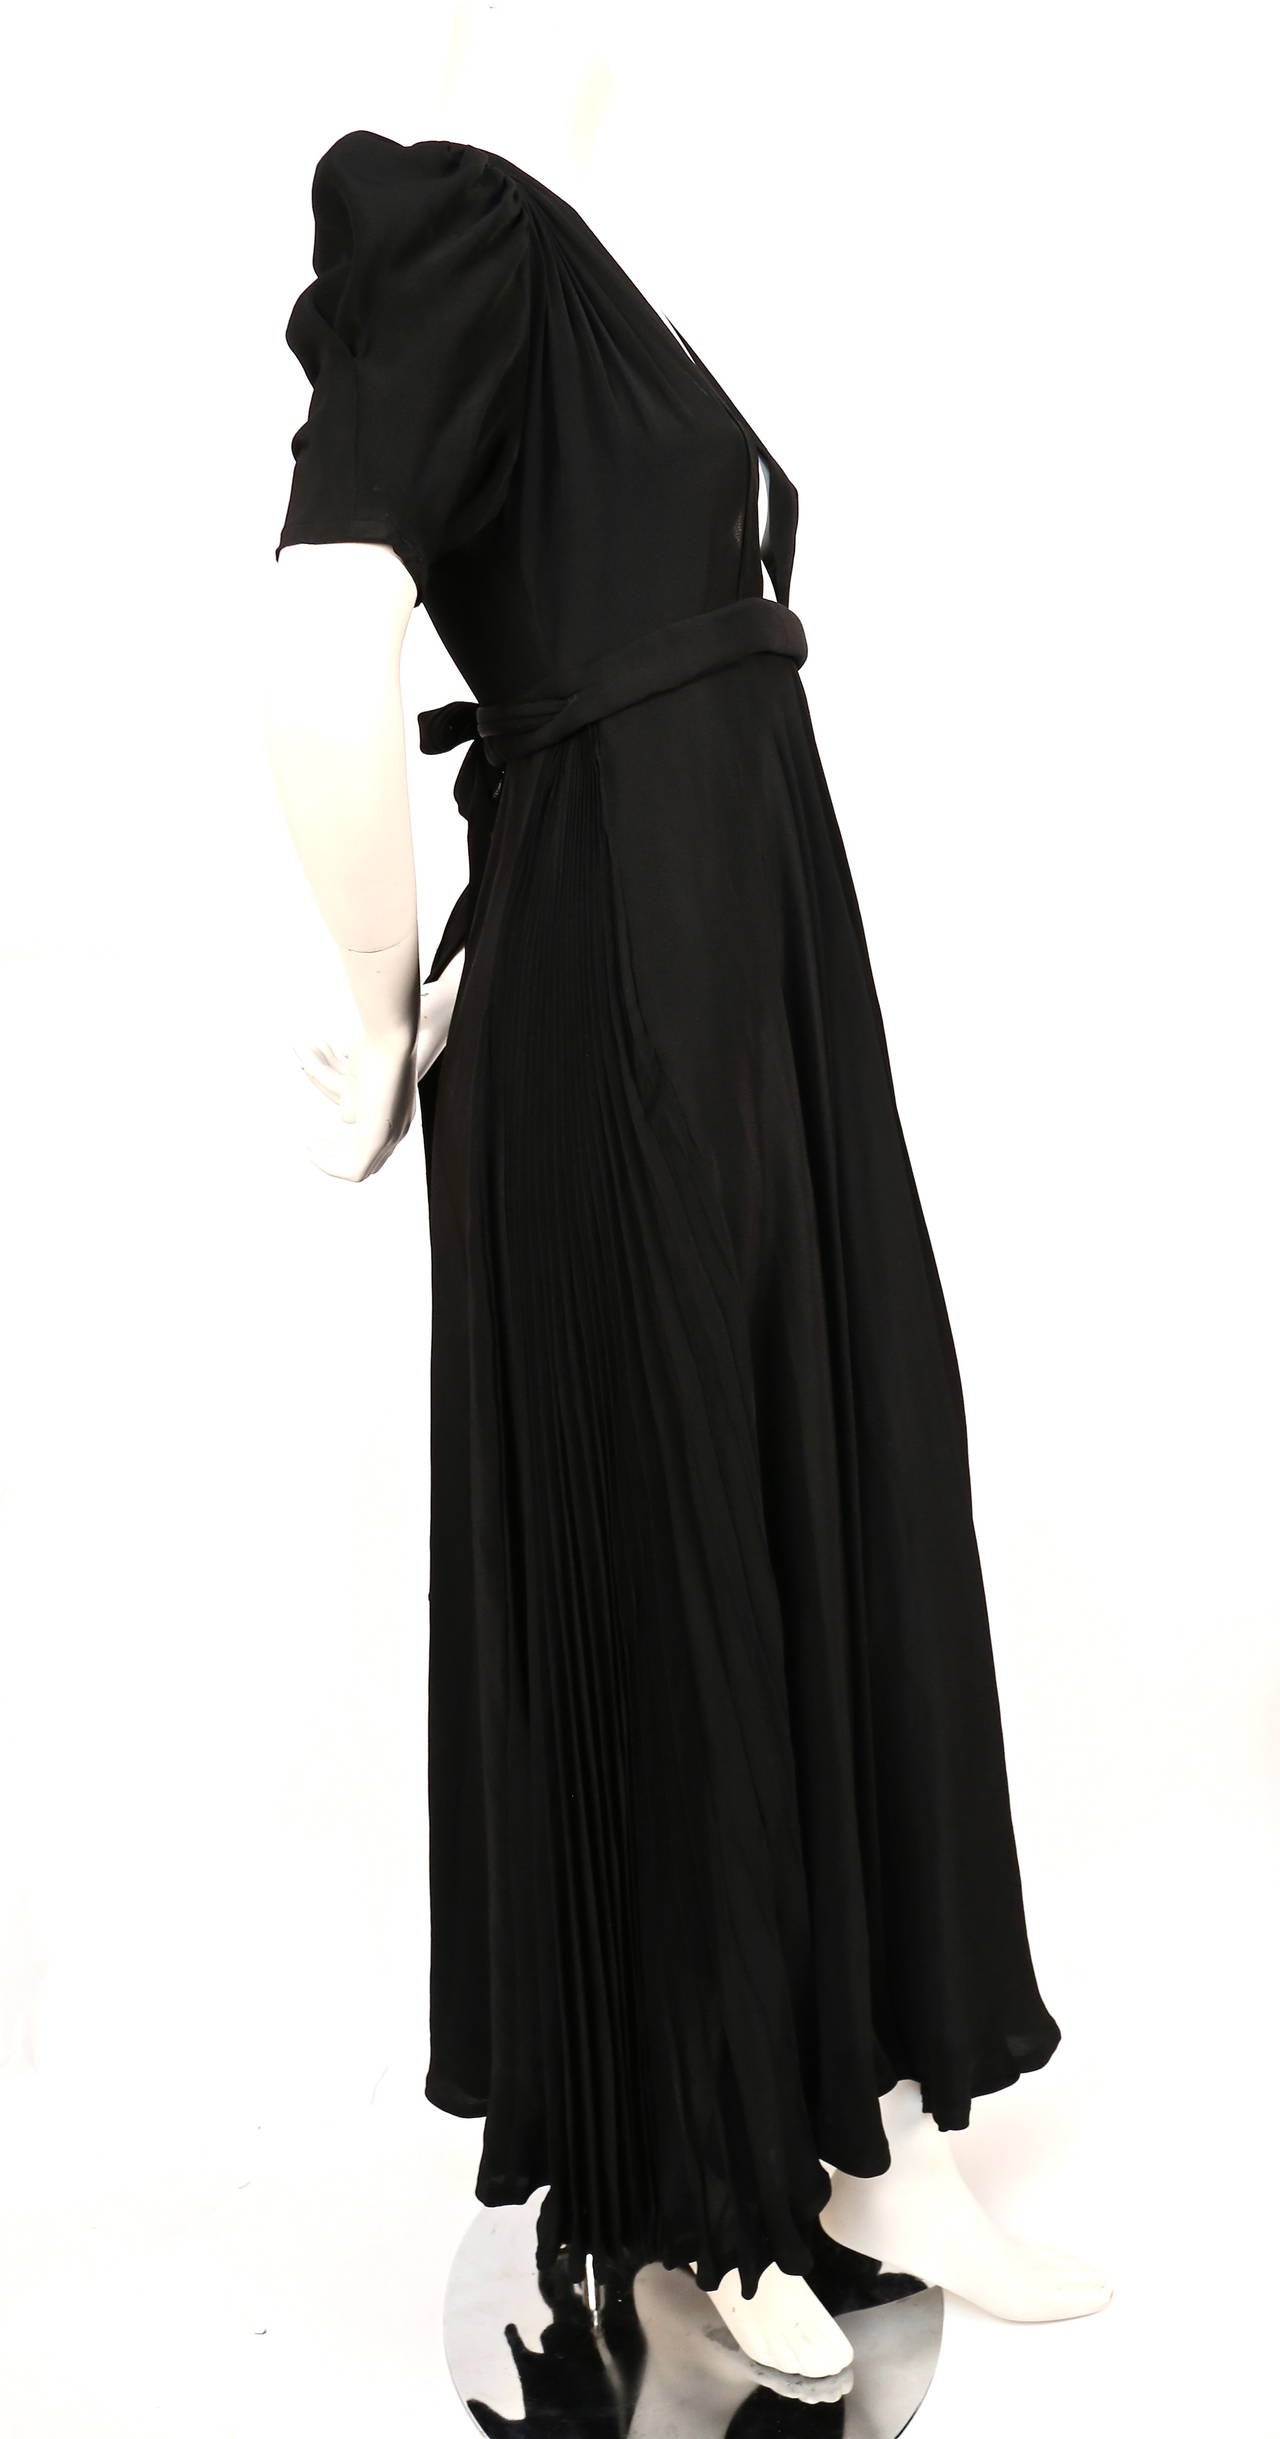 A jet black silk crêpe 'Bridget' dress designed by Ossie Clark for Quorum dating to 1970.  Labelled 'Ossie Clark, size 10', with plunging neckline, wrap-over skirt with knife-pleated side panels. Bust measures approximately 32